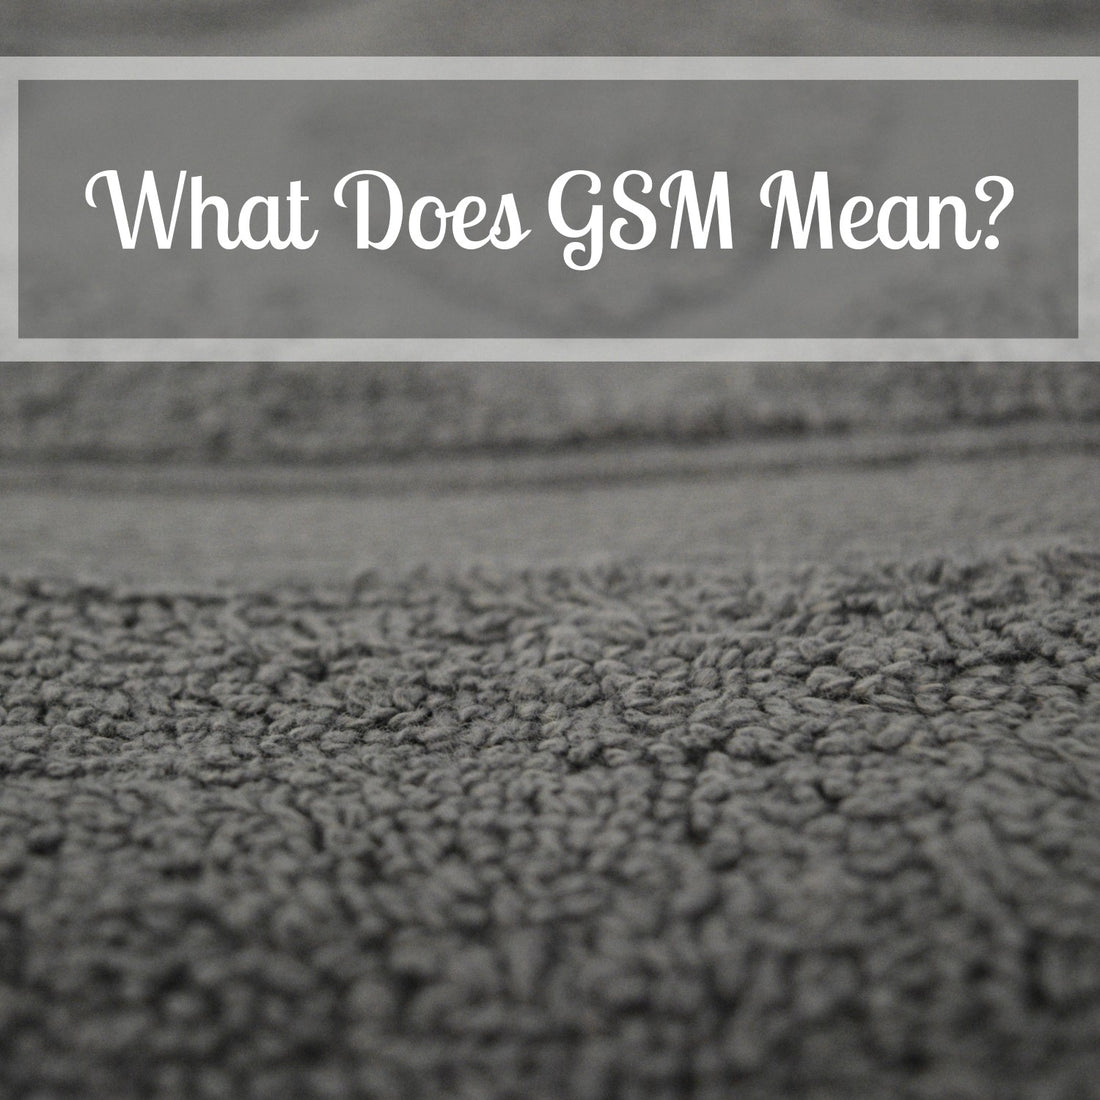 What Does GSM Mean?